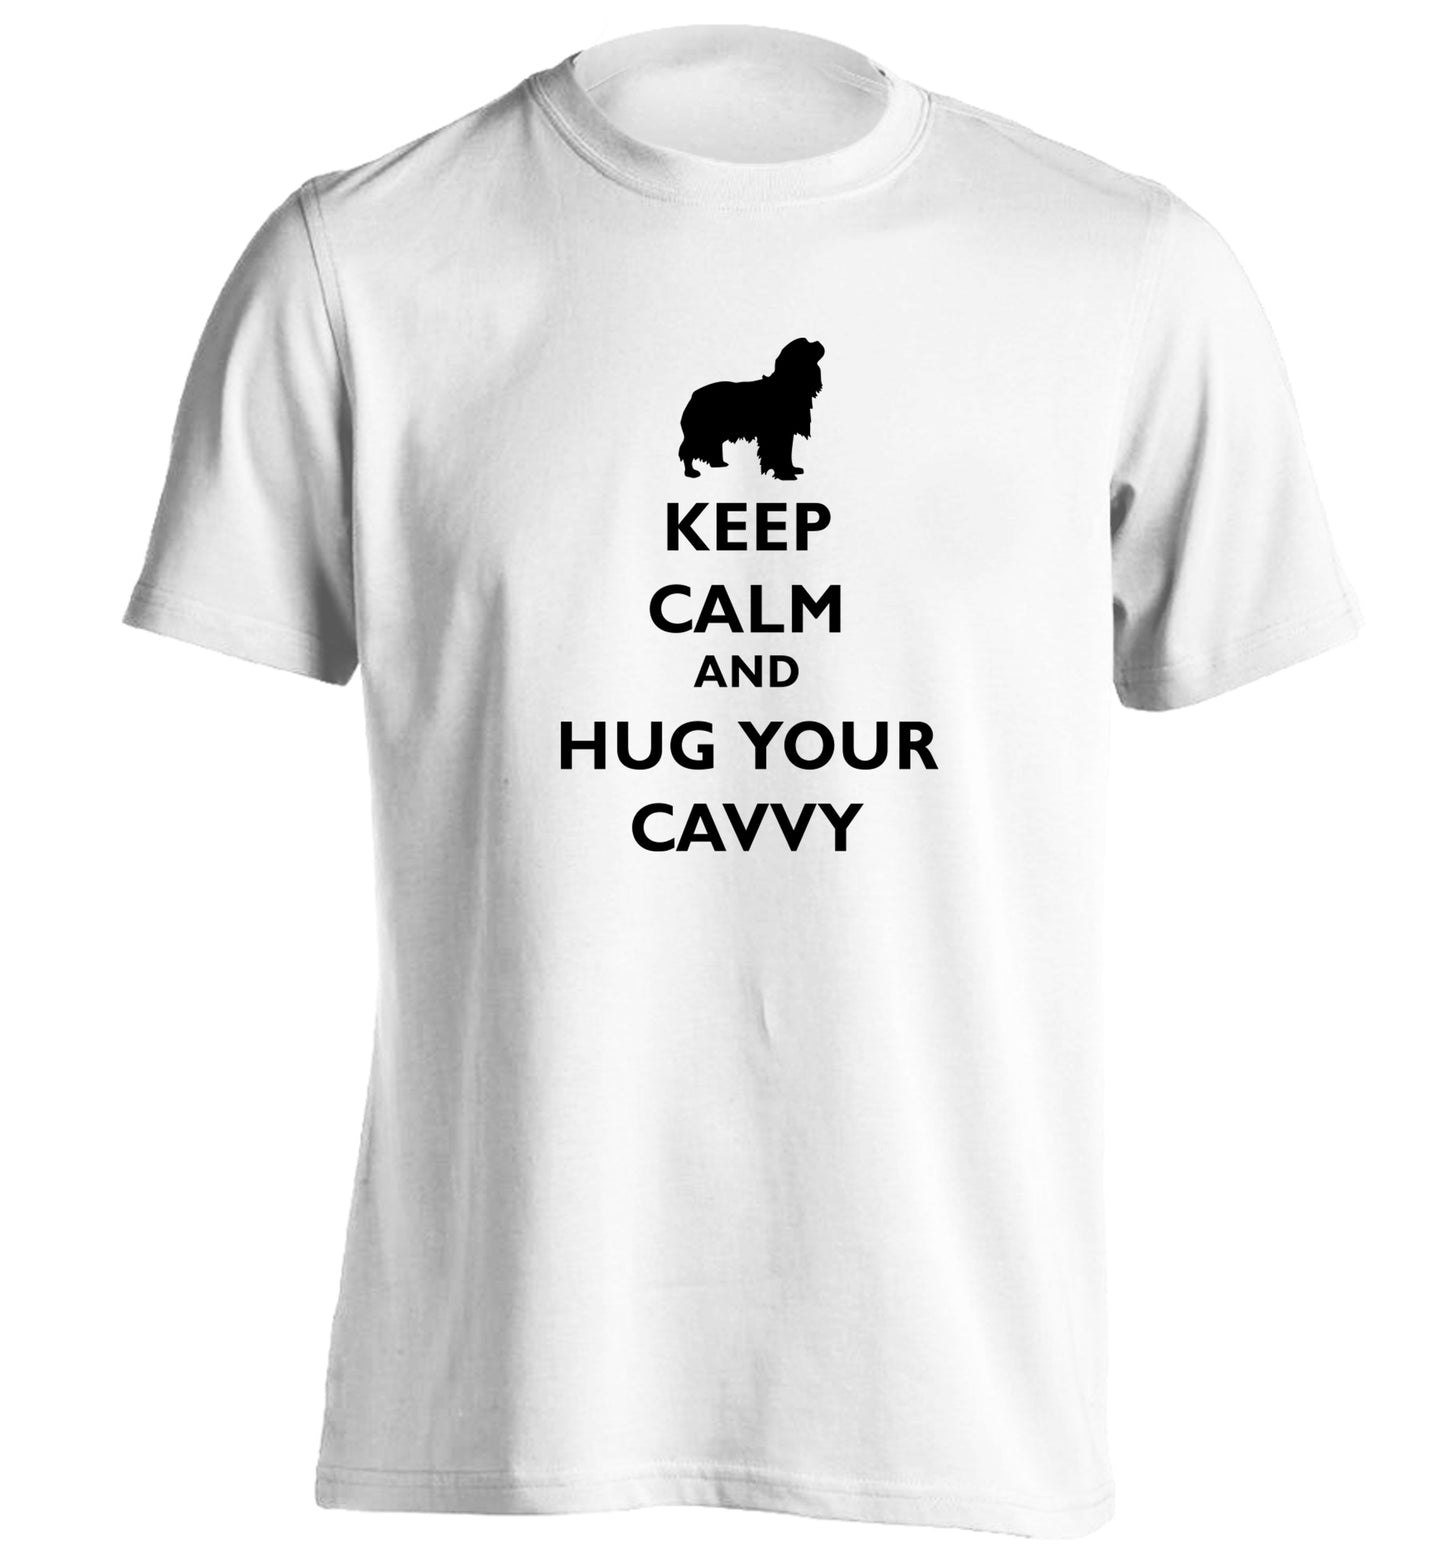 Keep calm and hug your cavvy adults unisex white Tshirt 2XL